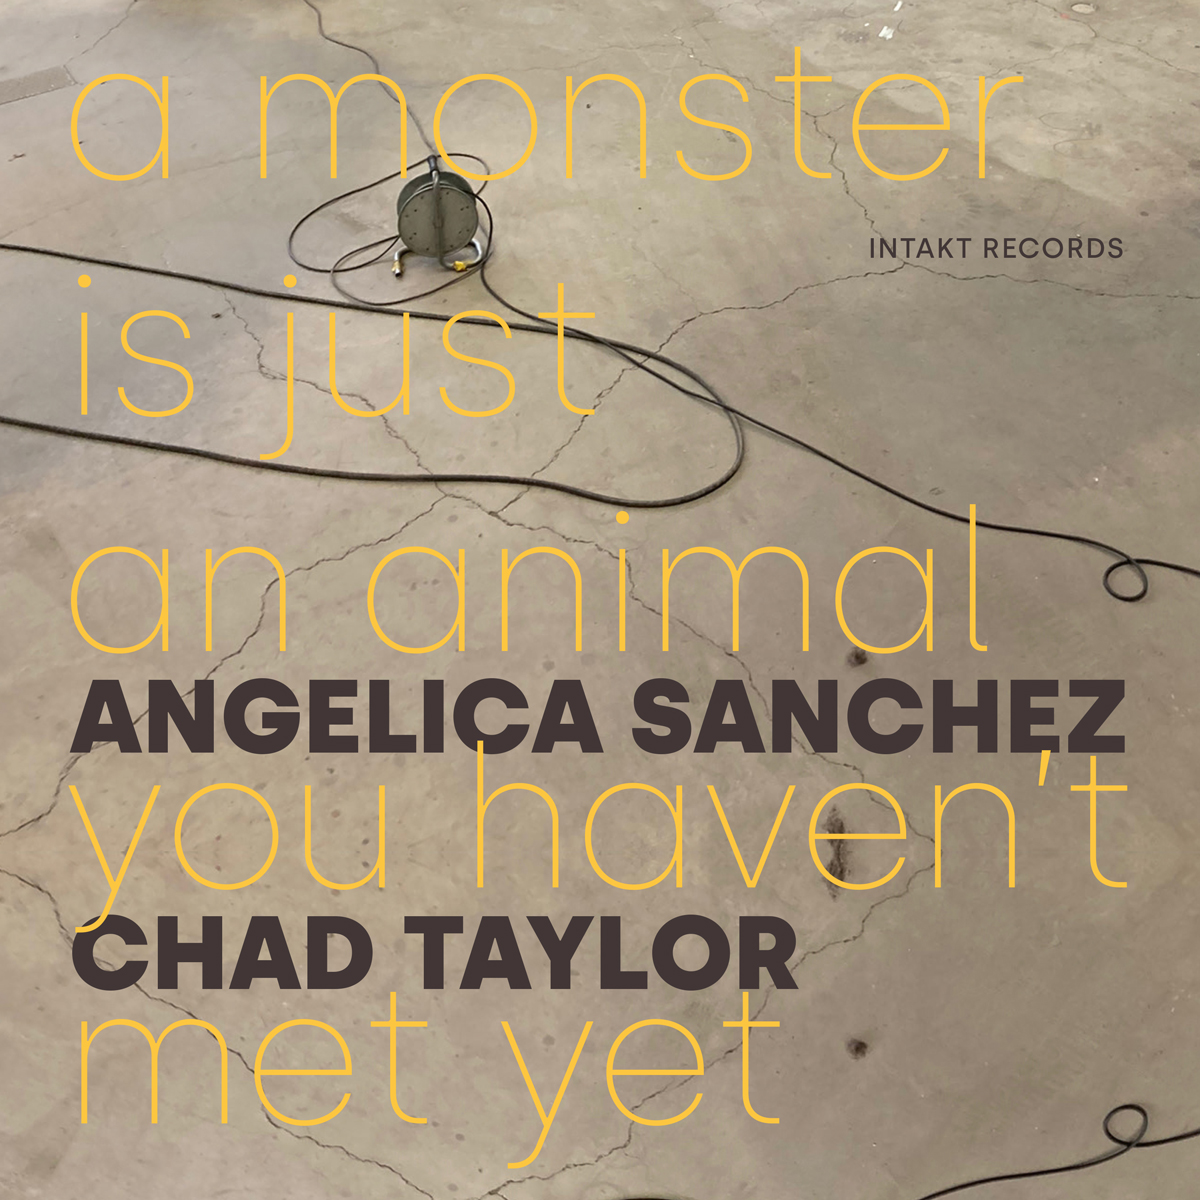 ANGELICA SANCHEZ – CHAD TAYLOR
A MONSTER IS JUST AN ANIMAL YOU HAVEN’T MET YET front cover intakt records 413